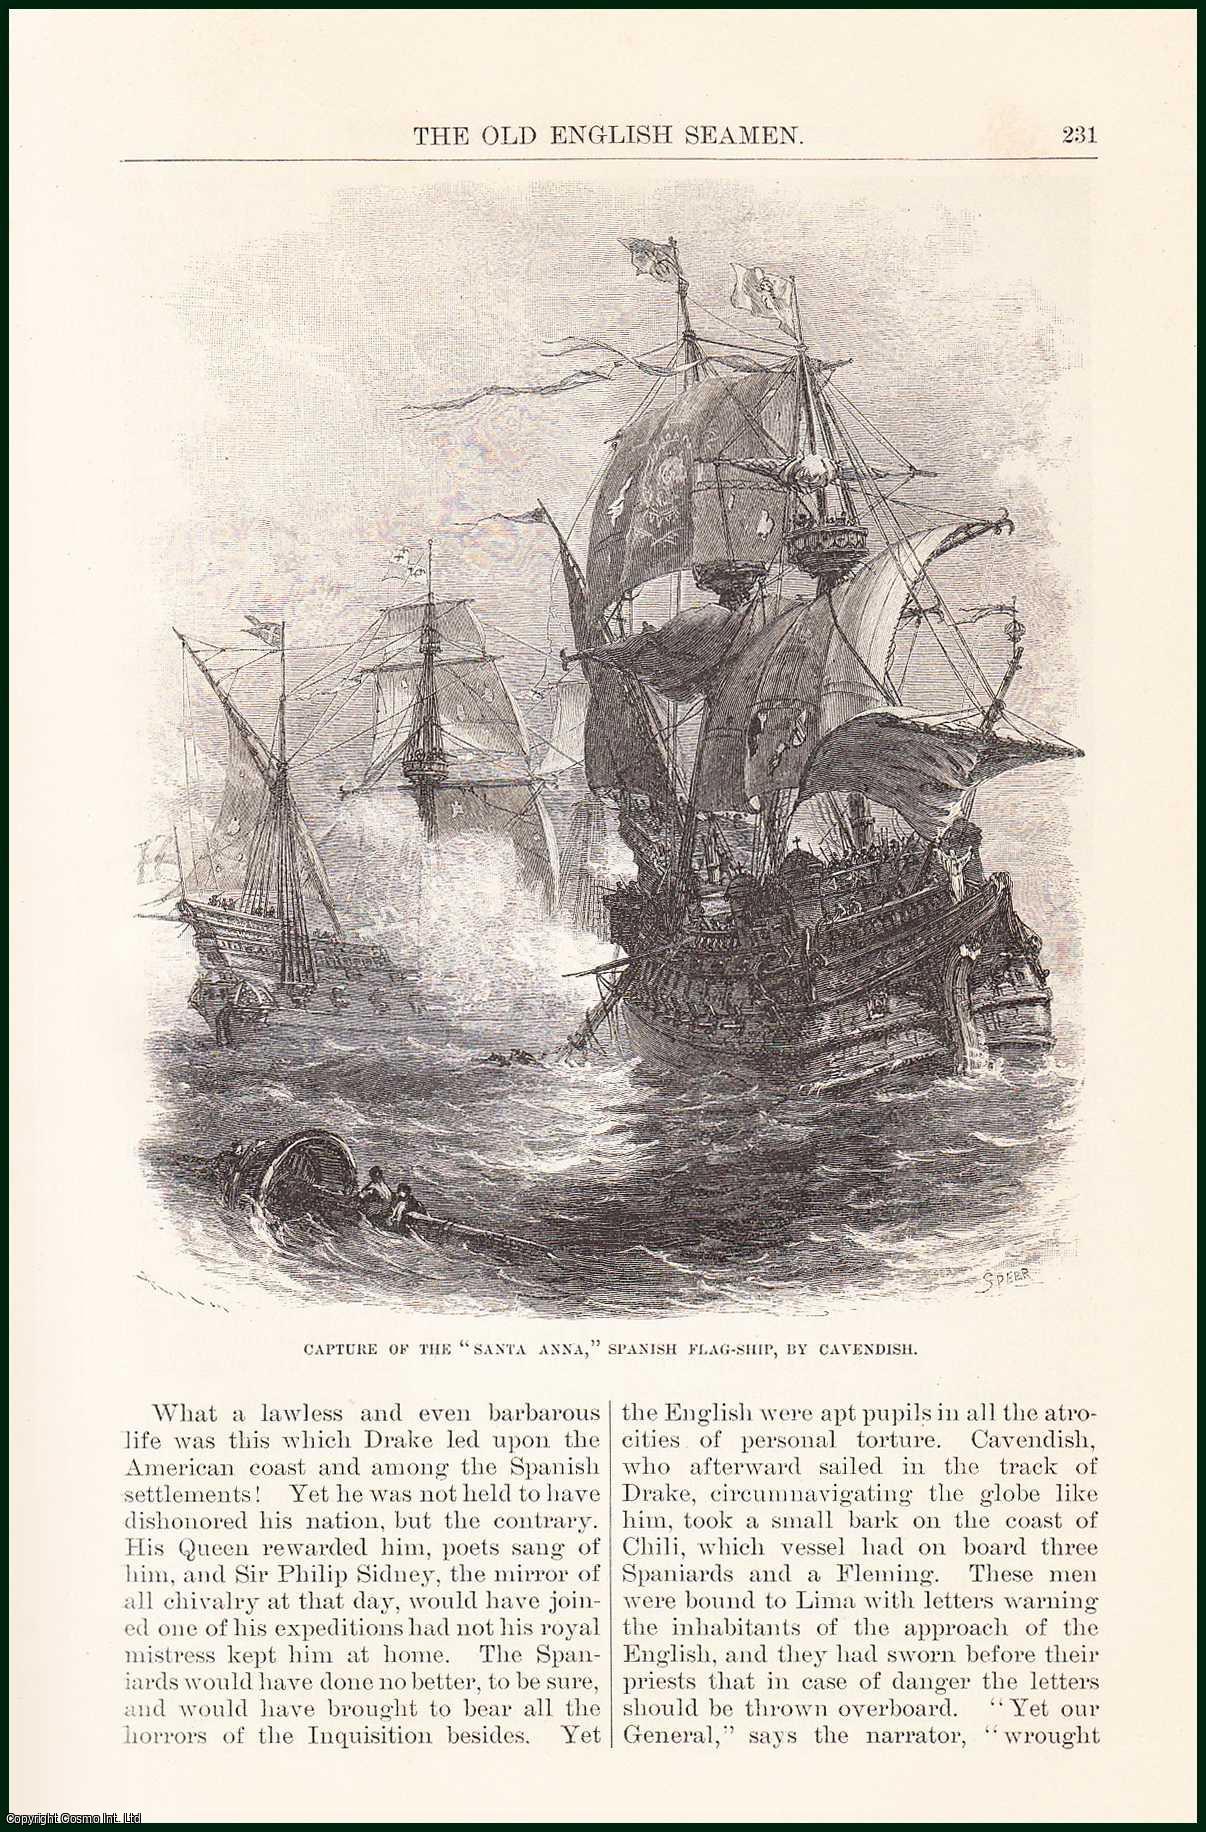 Thomas Wentworth Higgison - Sir Francis Drake's Attack on San Domingo ; Defeat of The British under Sir John Hawkins at San Juan De Ulloa ; The Capture of The Santa Anna, Spanish Flag-Ship, by Cavendish & more : The Old English Seamen. An uncommon original article from the Harper's Monthly Magazine, 1883.